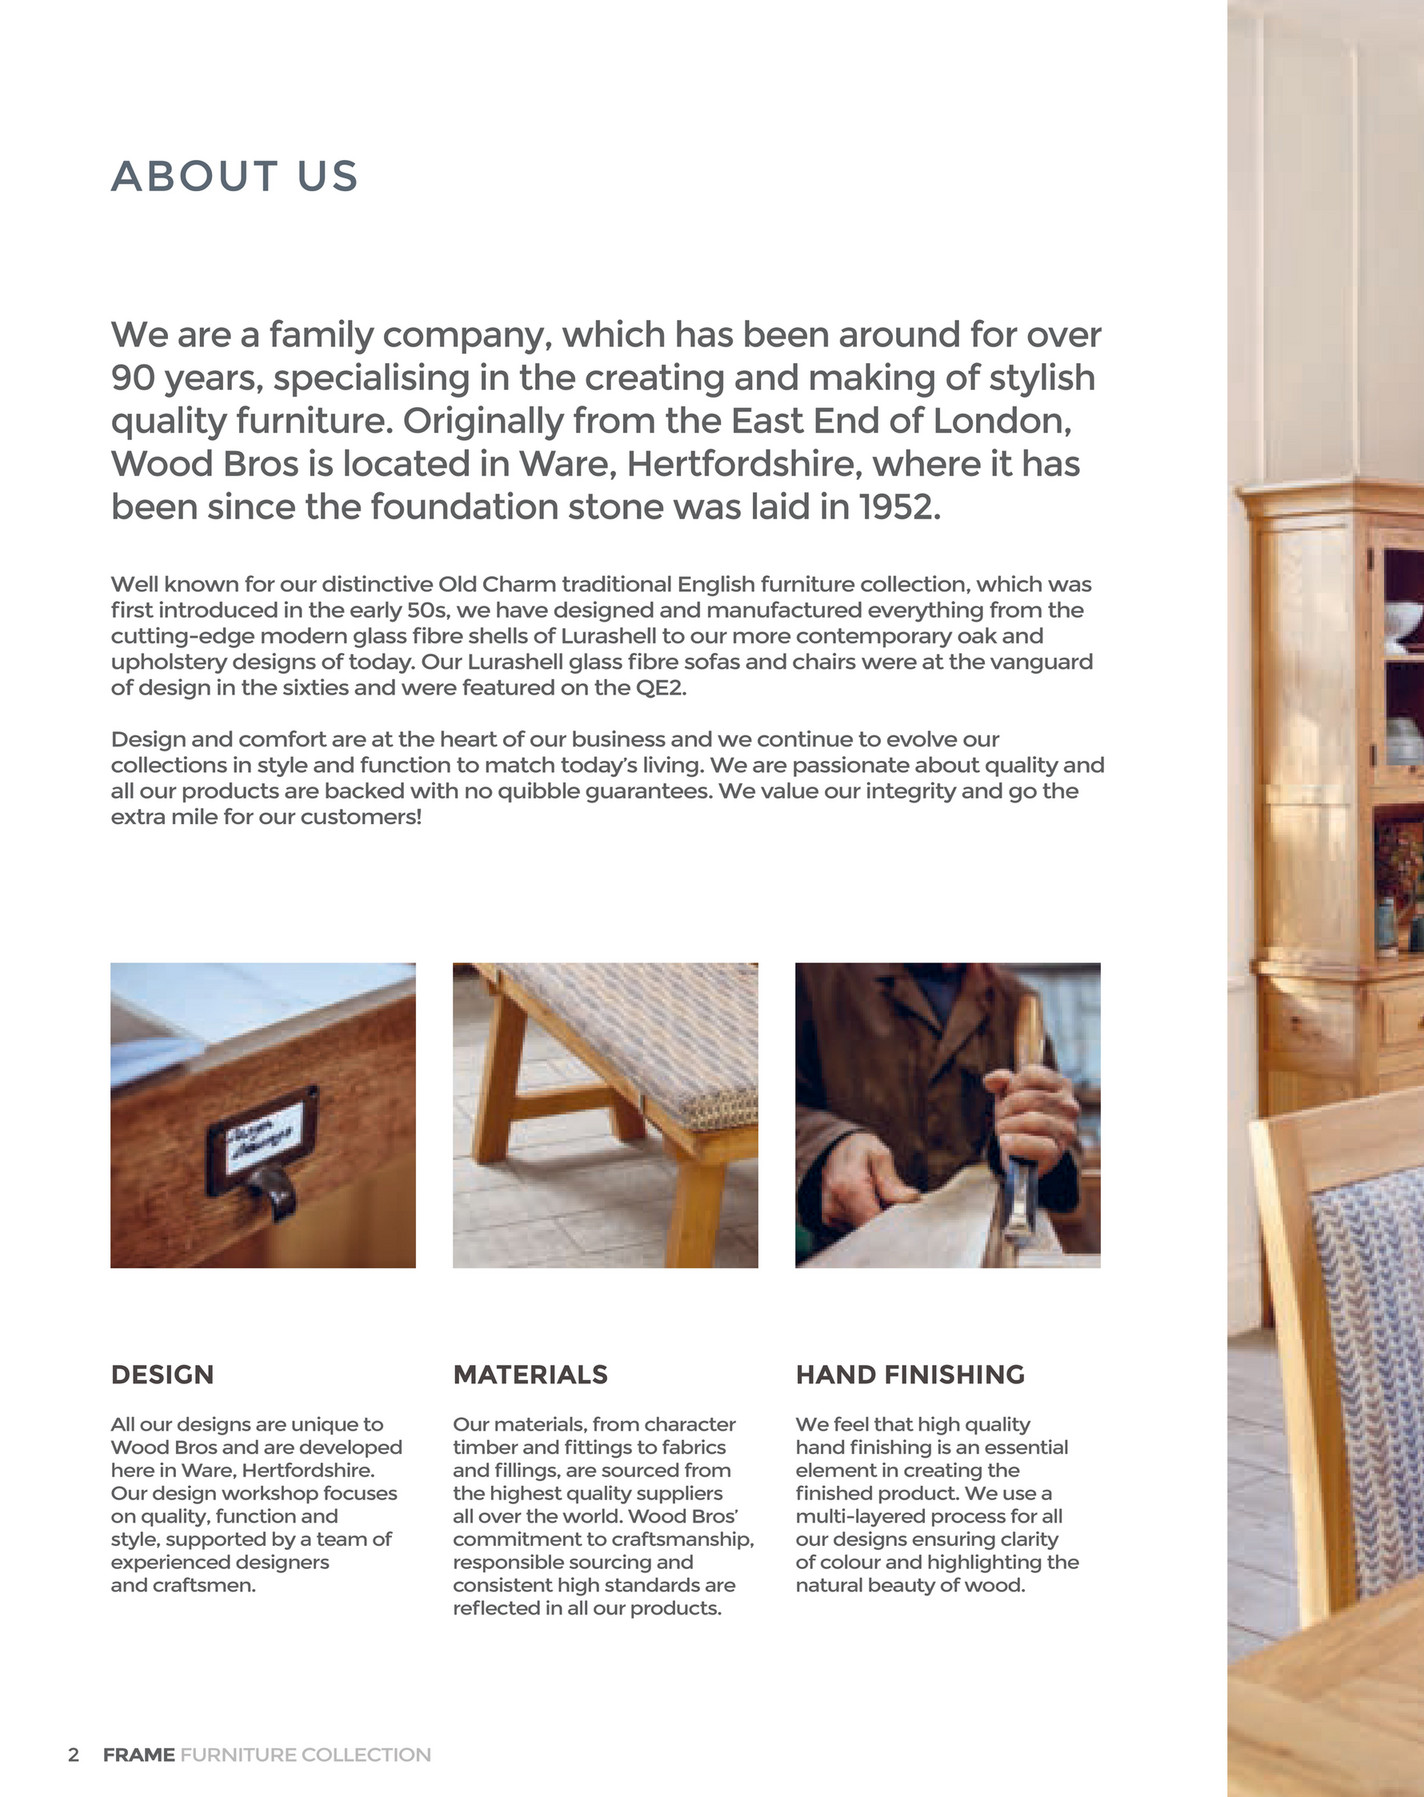 Wood Bros Furniture Frame Brochure Page 2 3 Created With